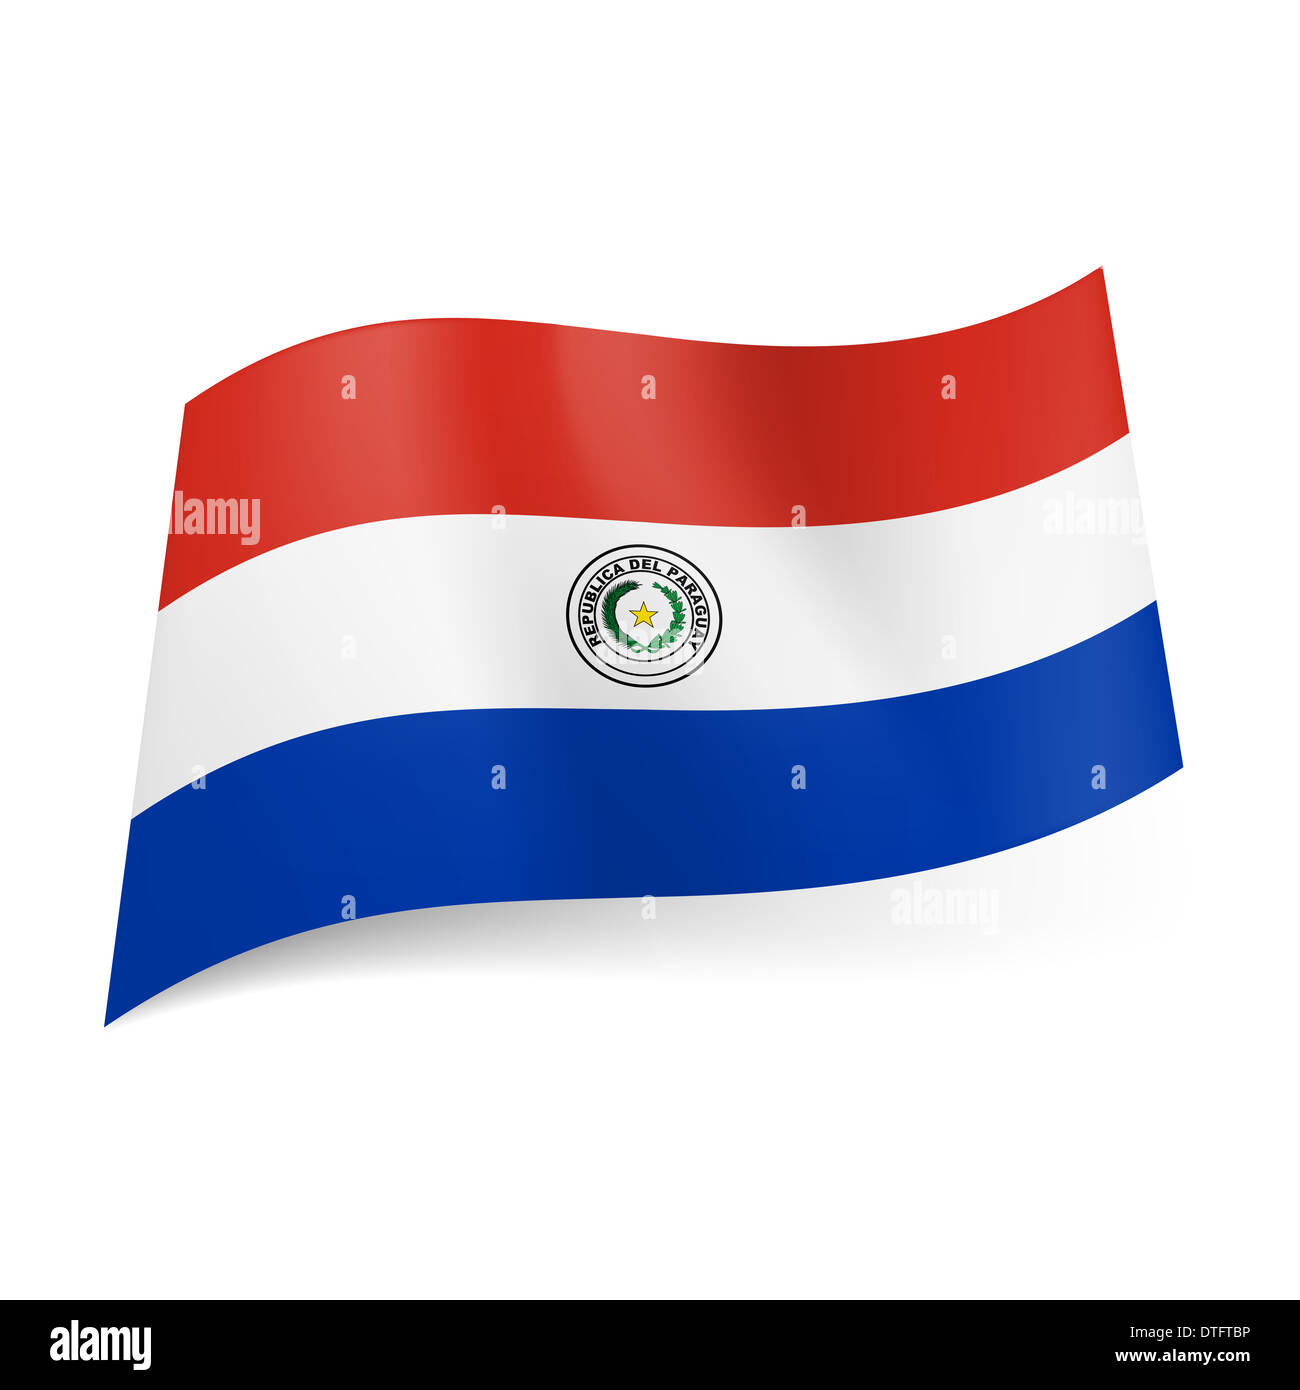 Rummelig Arkitektur Ret National flag of Paraguay: red, white and blue horizontal stripes with  coat-of-arms on central band Stock Photo - Alamy